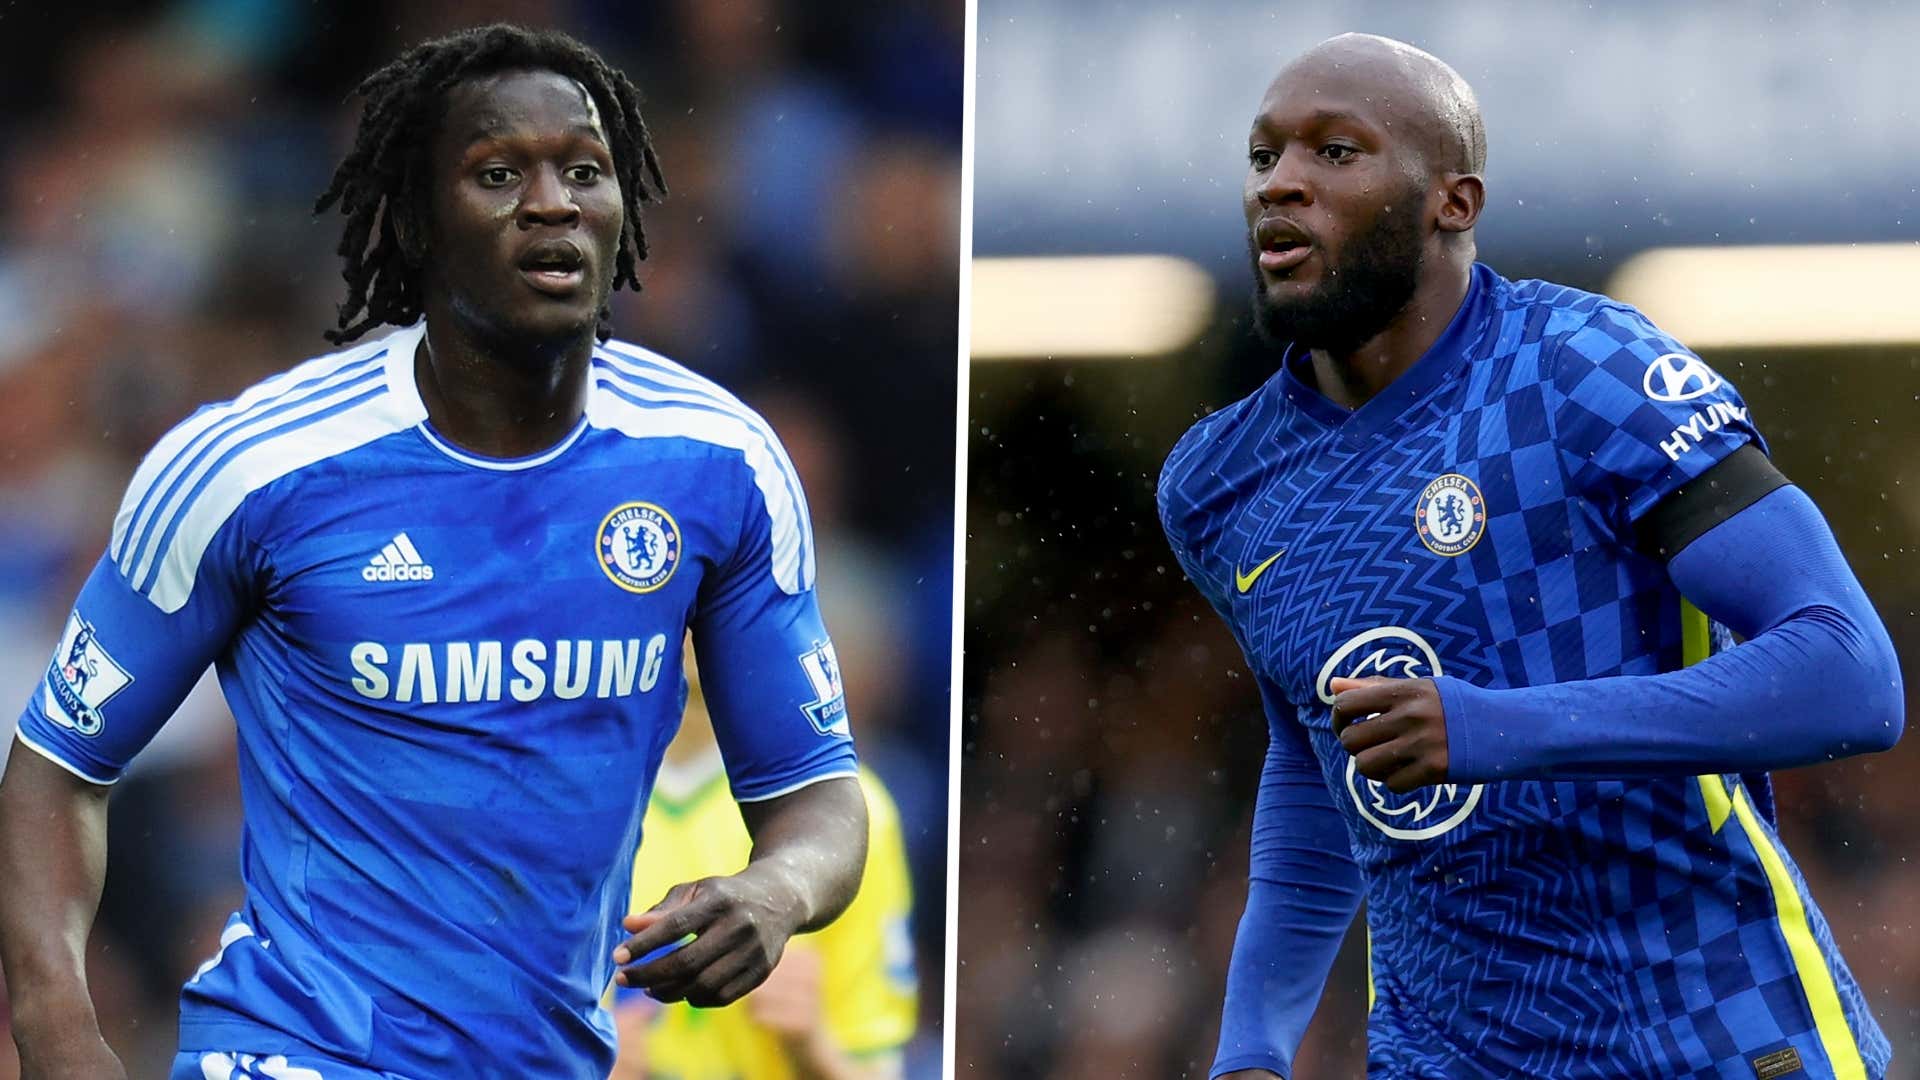 Lukaku explains how Chelsea pain helped to make him ‘the complete package’